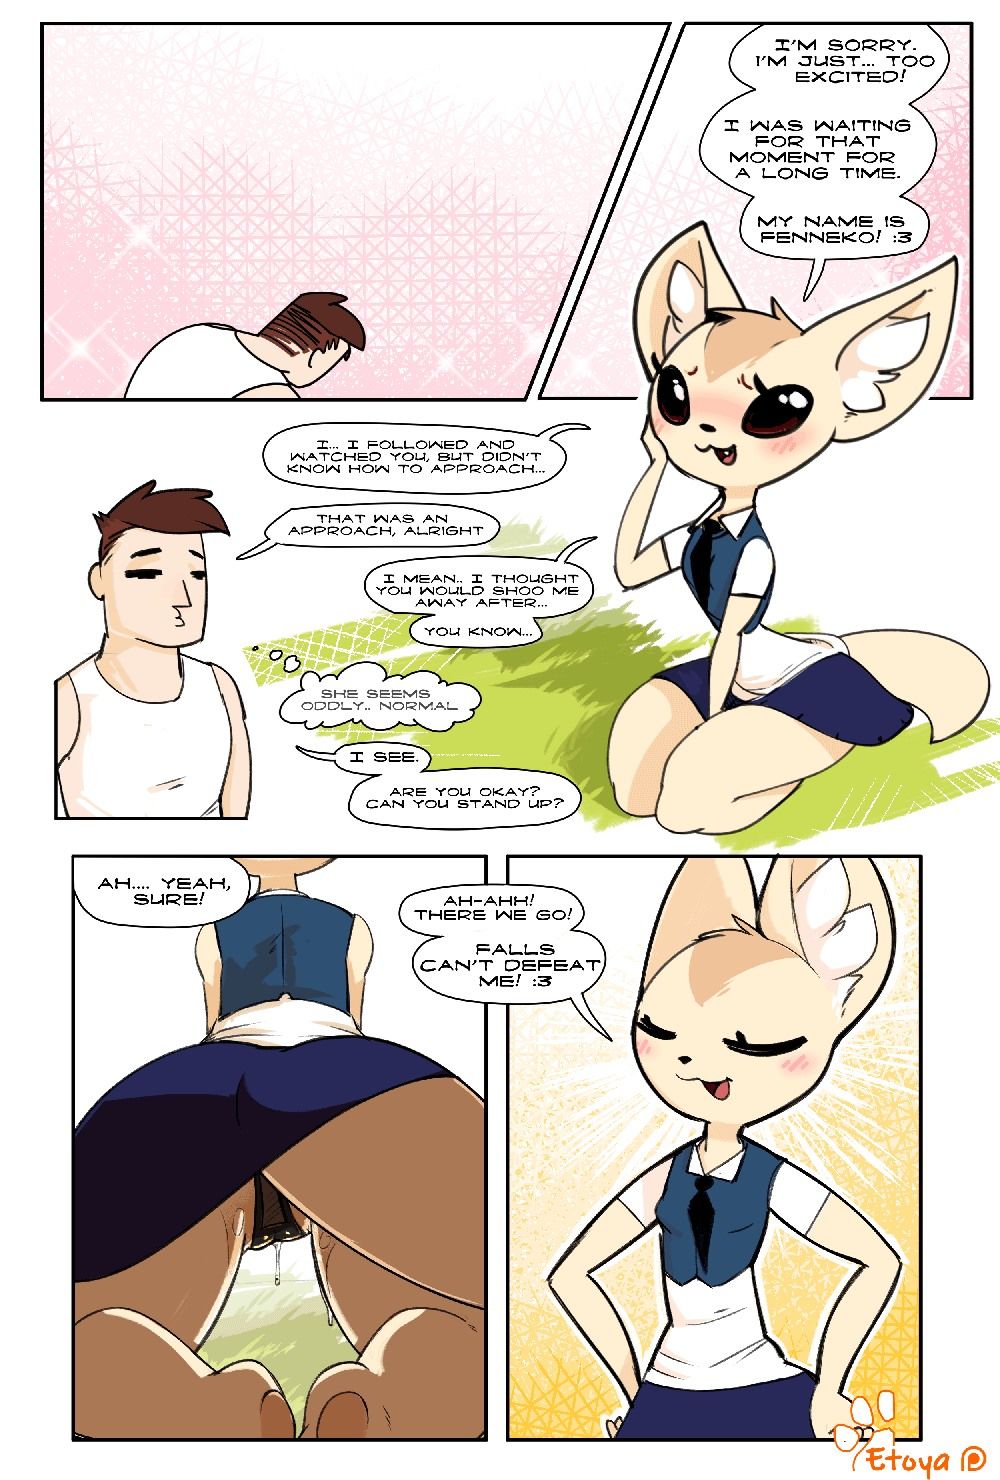 Strangers with Benefits by Eto ya page 3